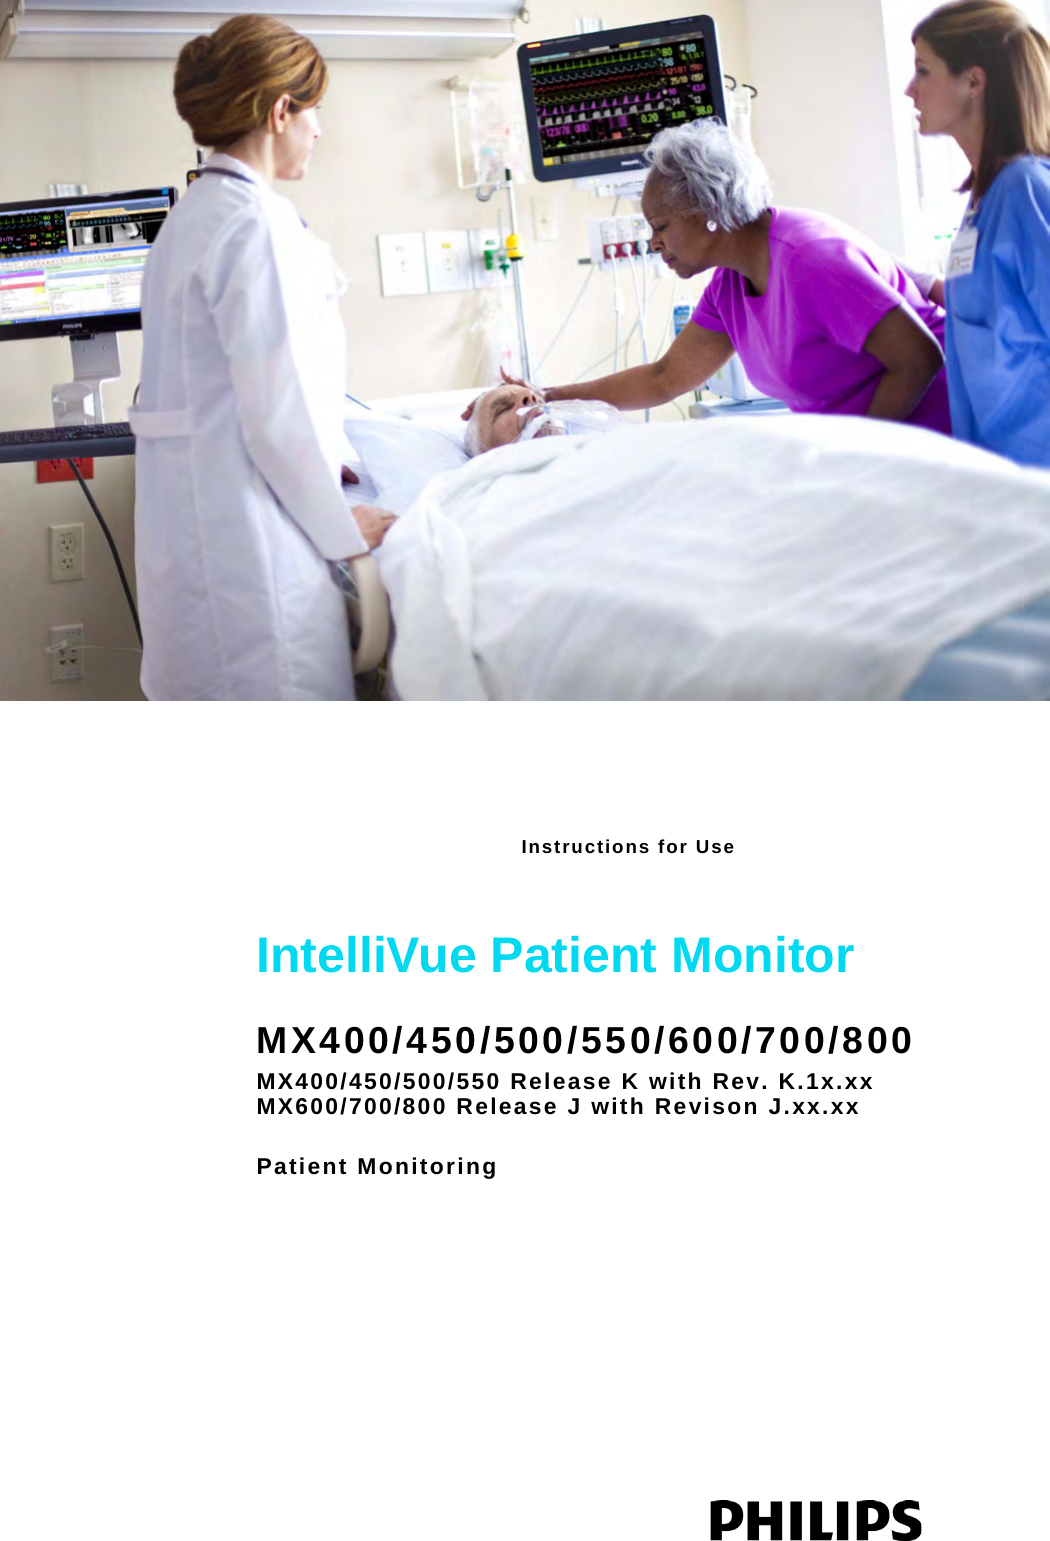 Instructions for Use IntelliVue Patient MonitorMX400/450/500/550/600/700/800MX400/450/500/550 Release K with Rev. K.1x.xxMX600/700/800 Release J with Revison J.xx.xxPatient Monitoring